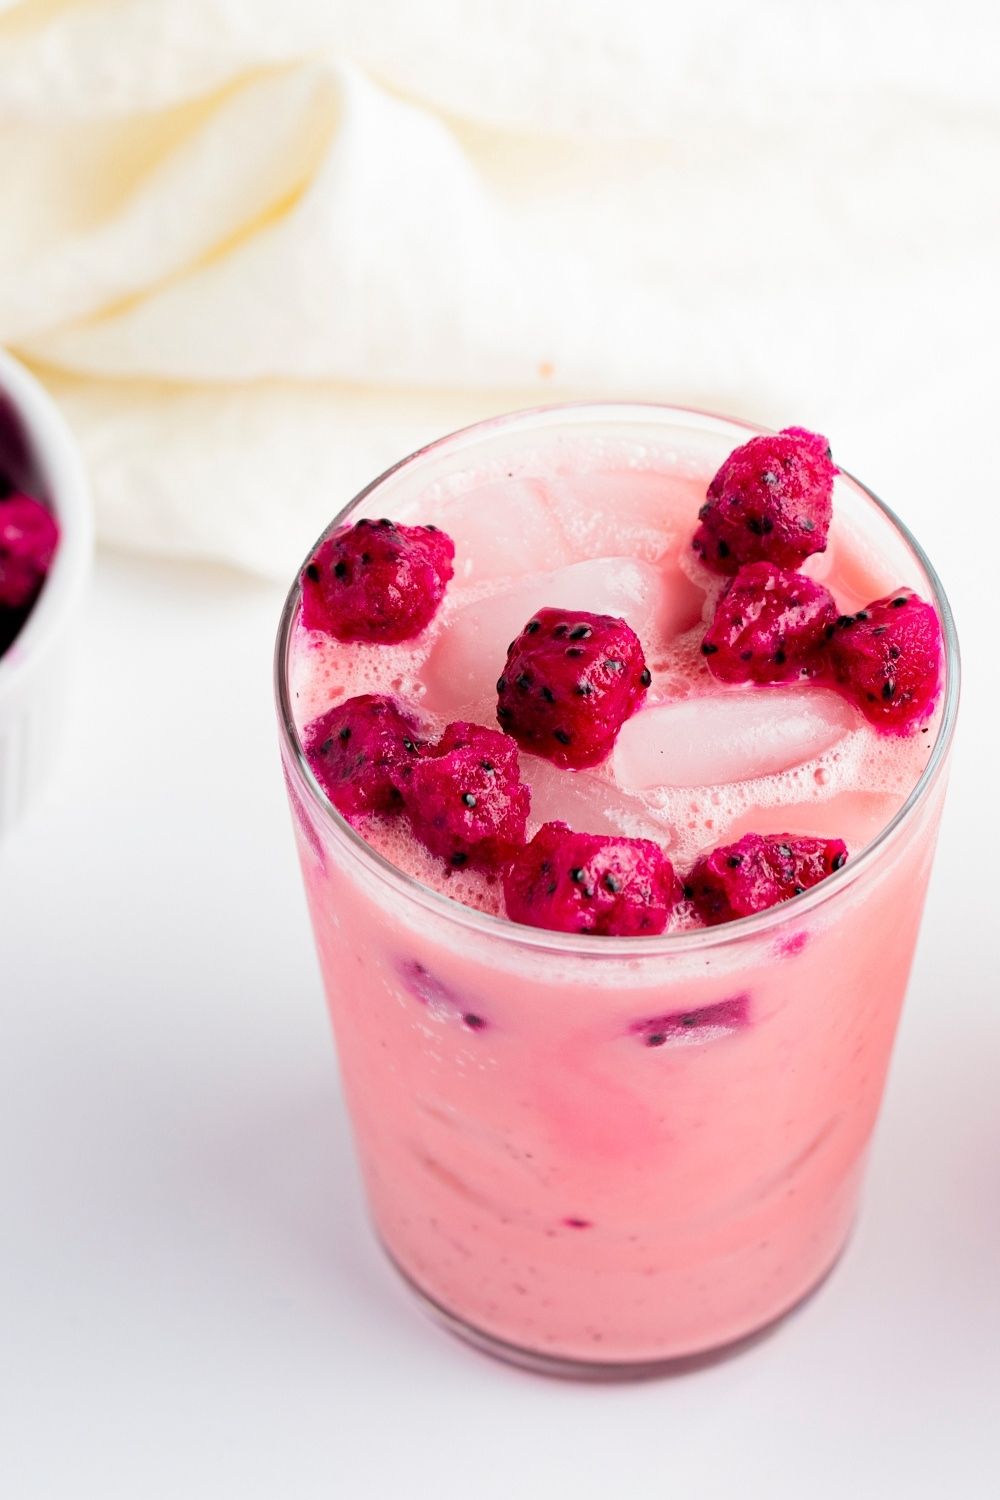 Cold Starbucks Dragon Drink with Diced Dragon Fruit and Ice in a Tall Glass